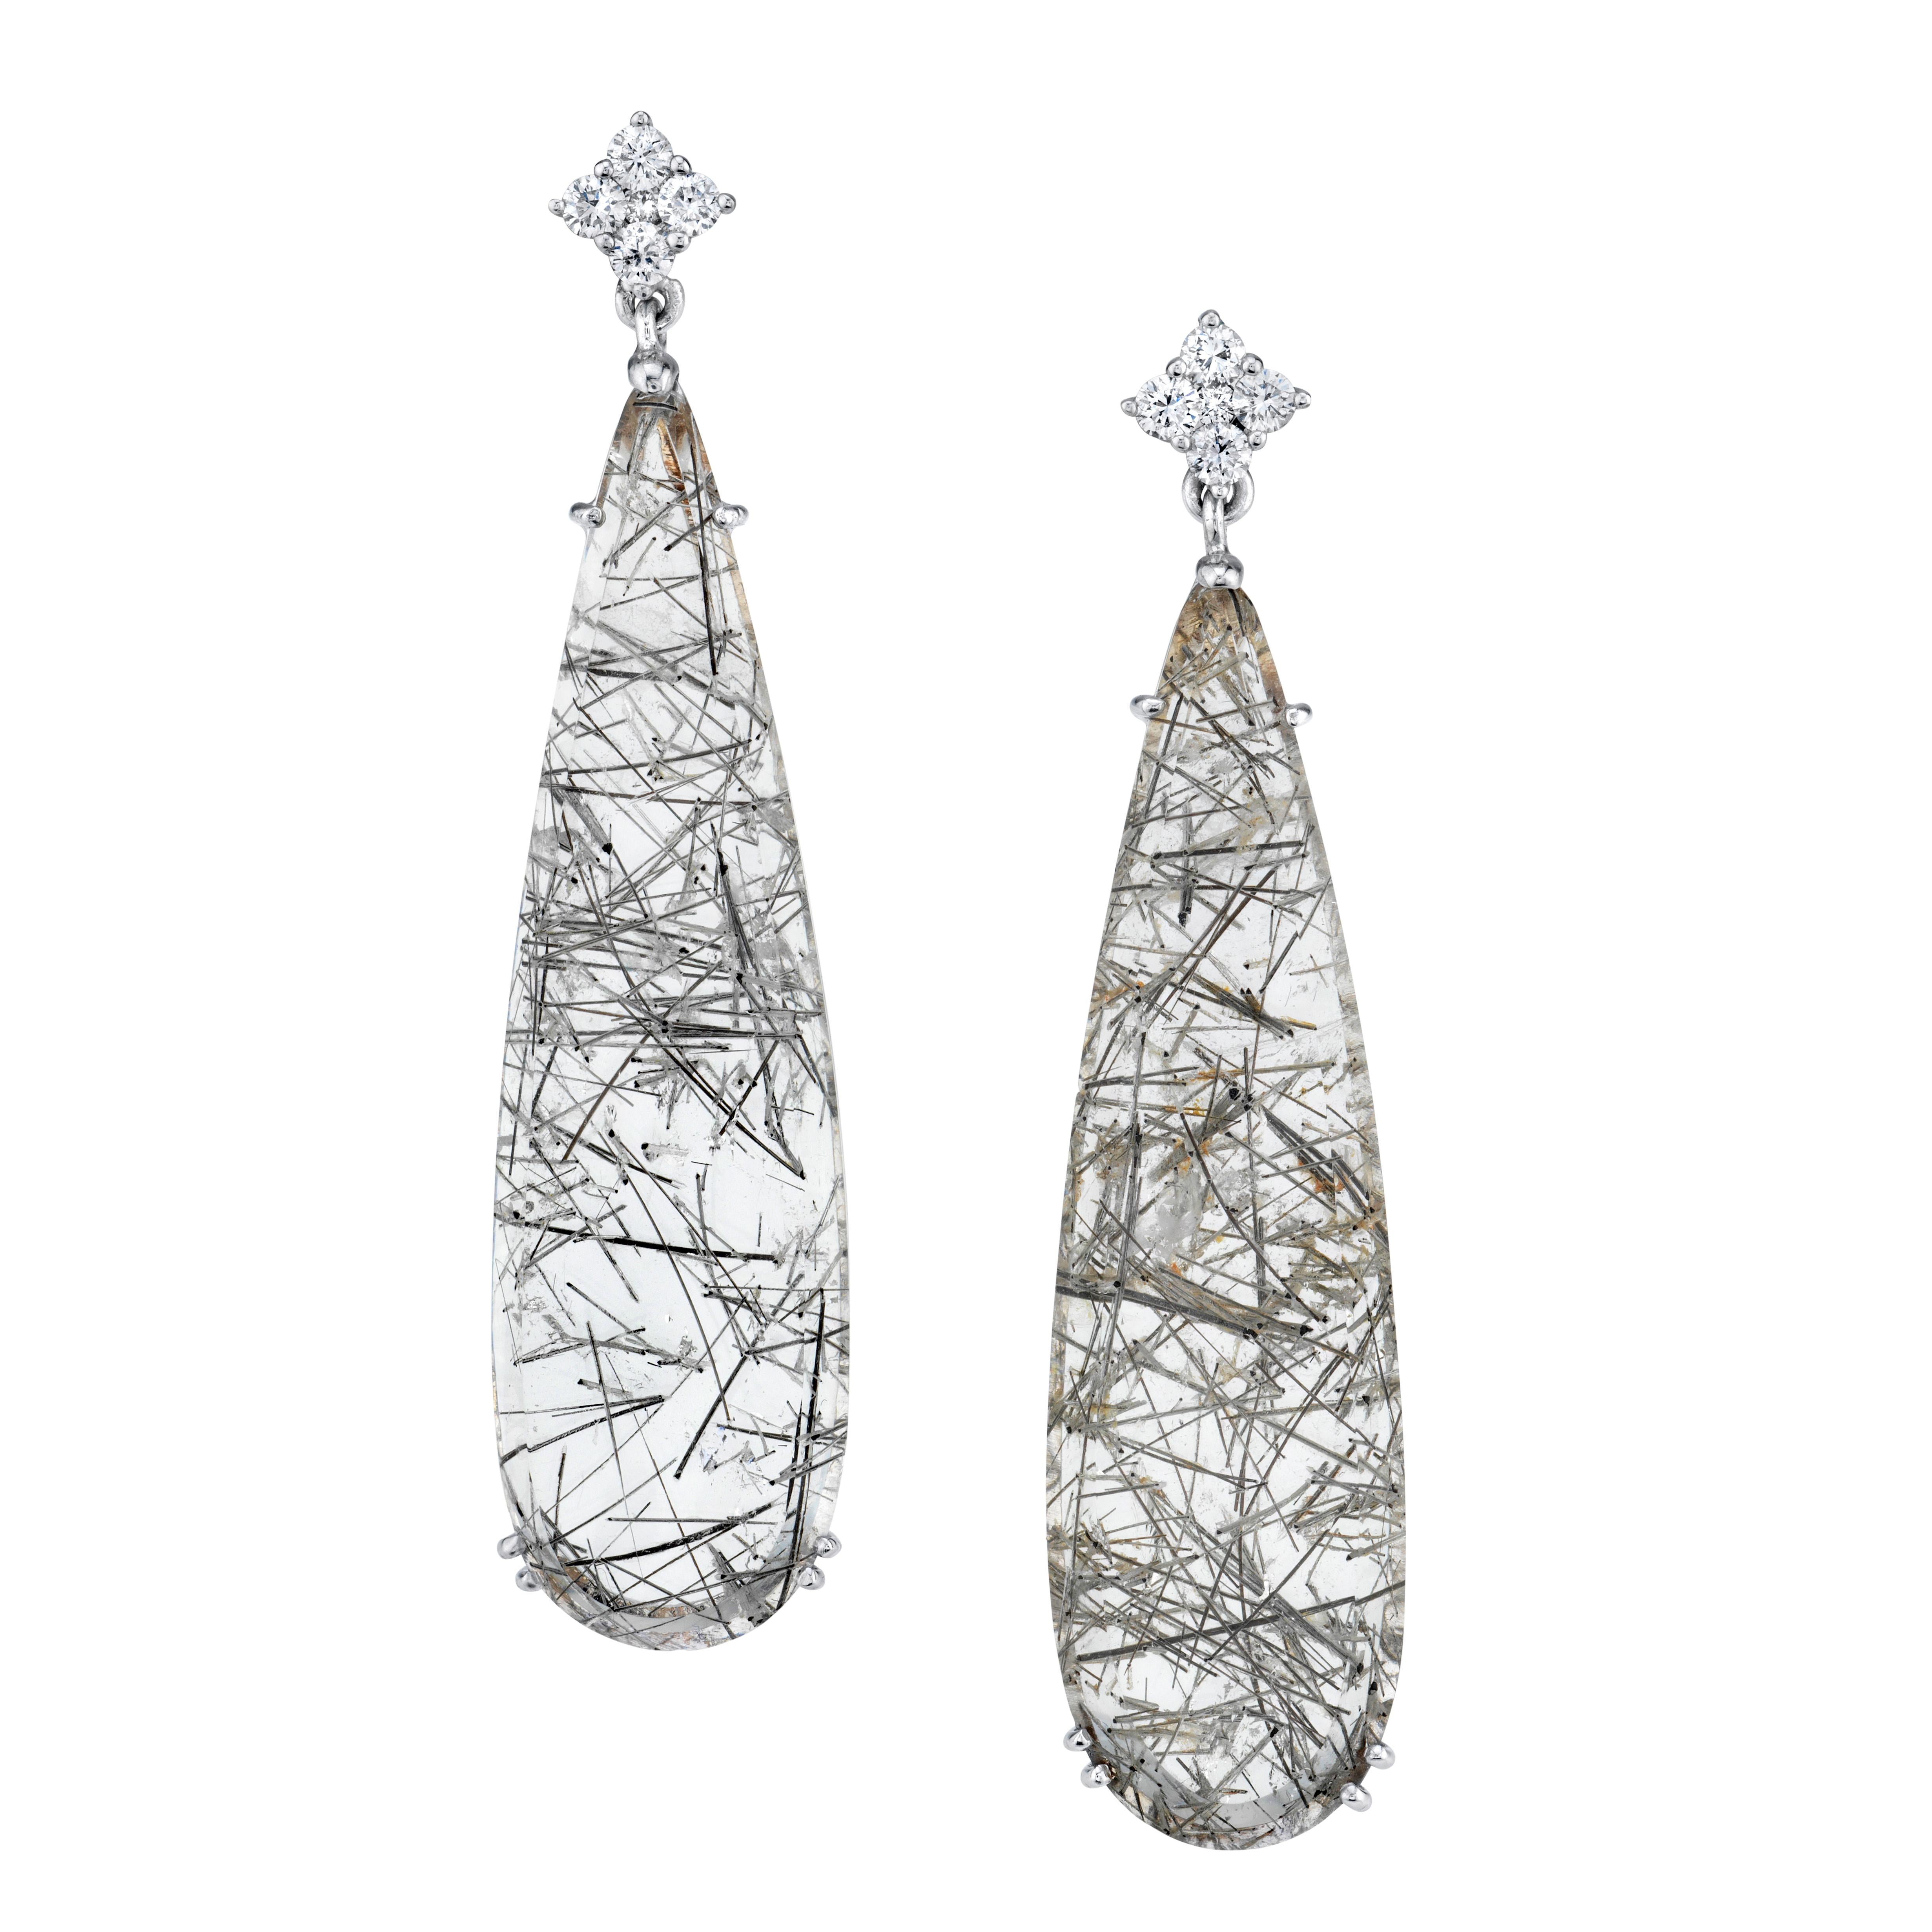 Artisan Actinolated Quartz and Diamond Drop Earrings in White Gold, 36.37 Carats Total For Sale